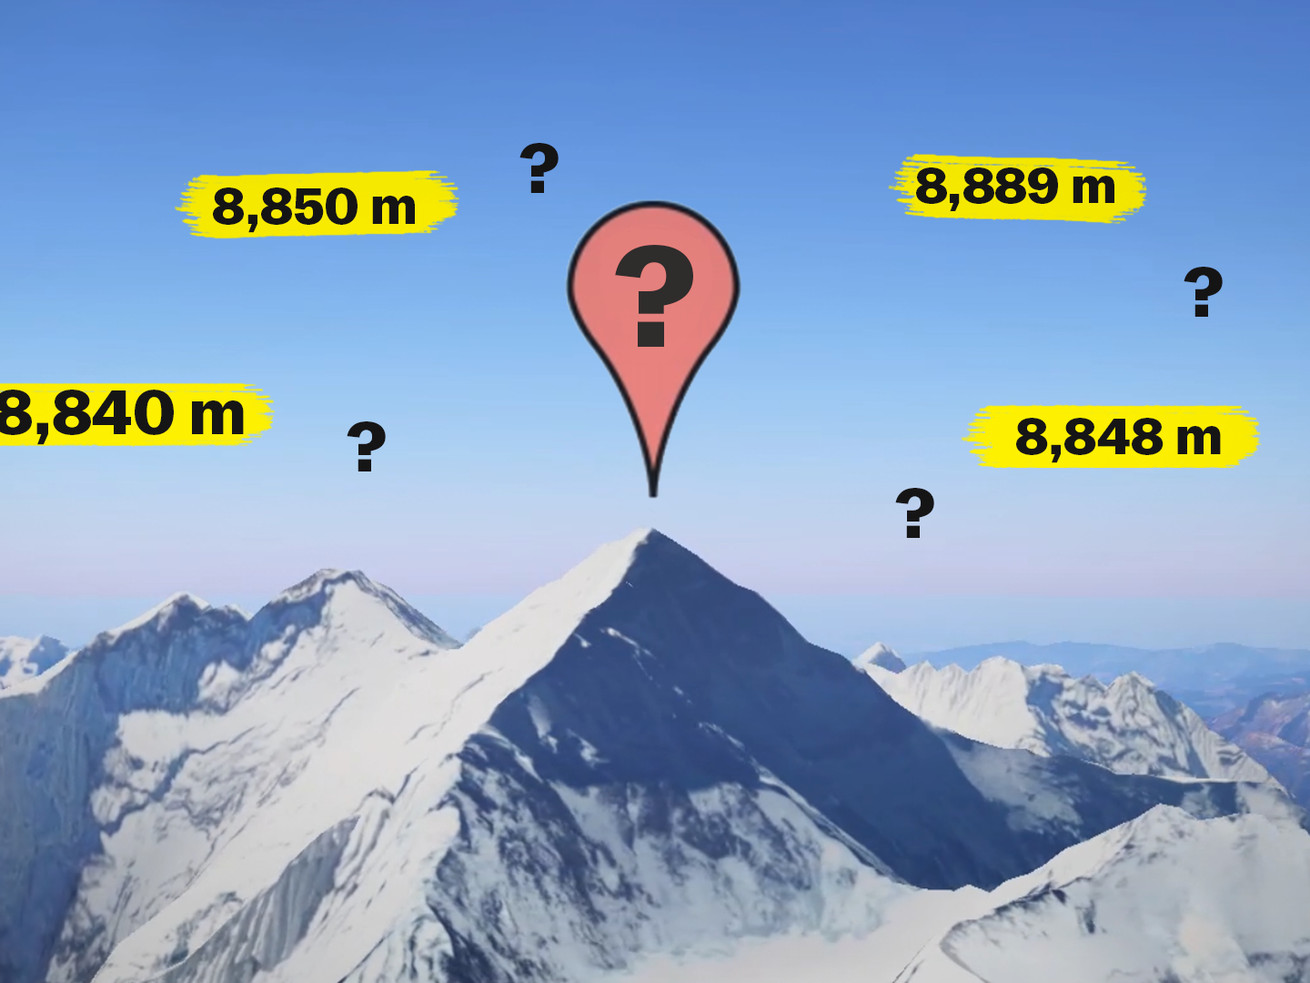 Why Mount Everest’s height keeps changing